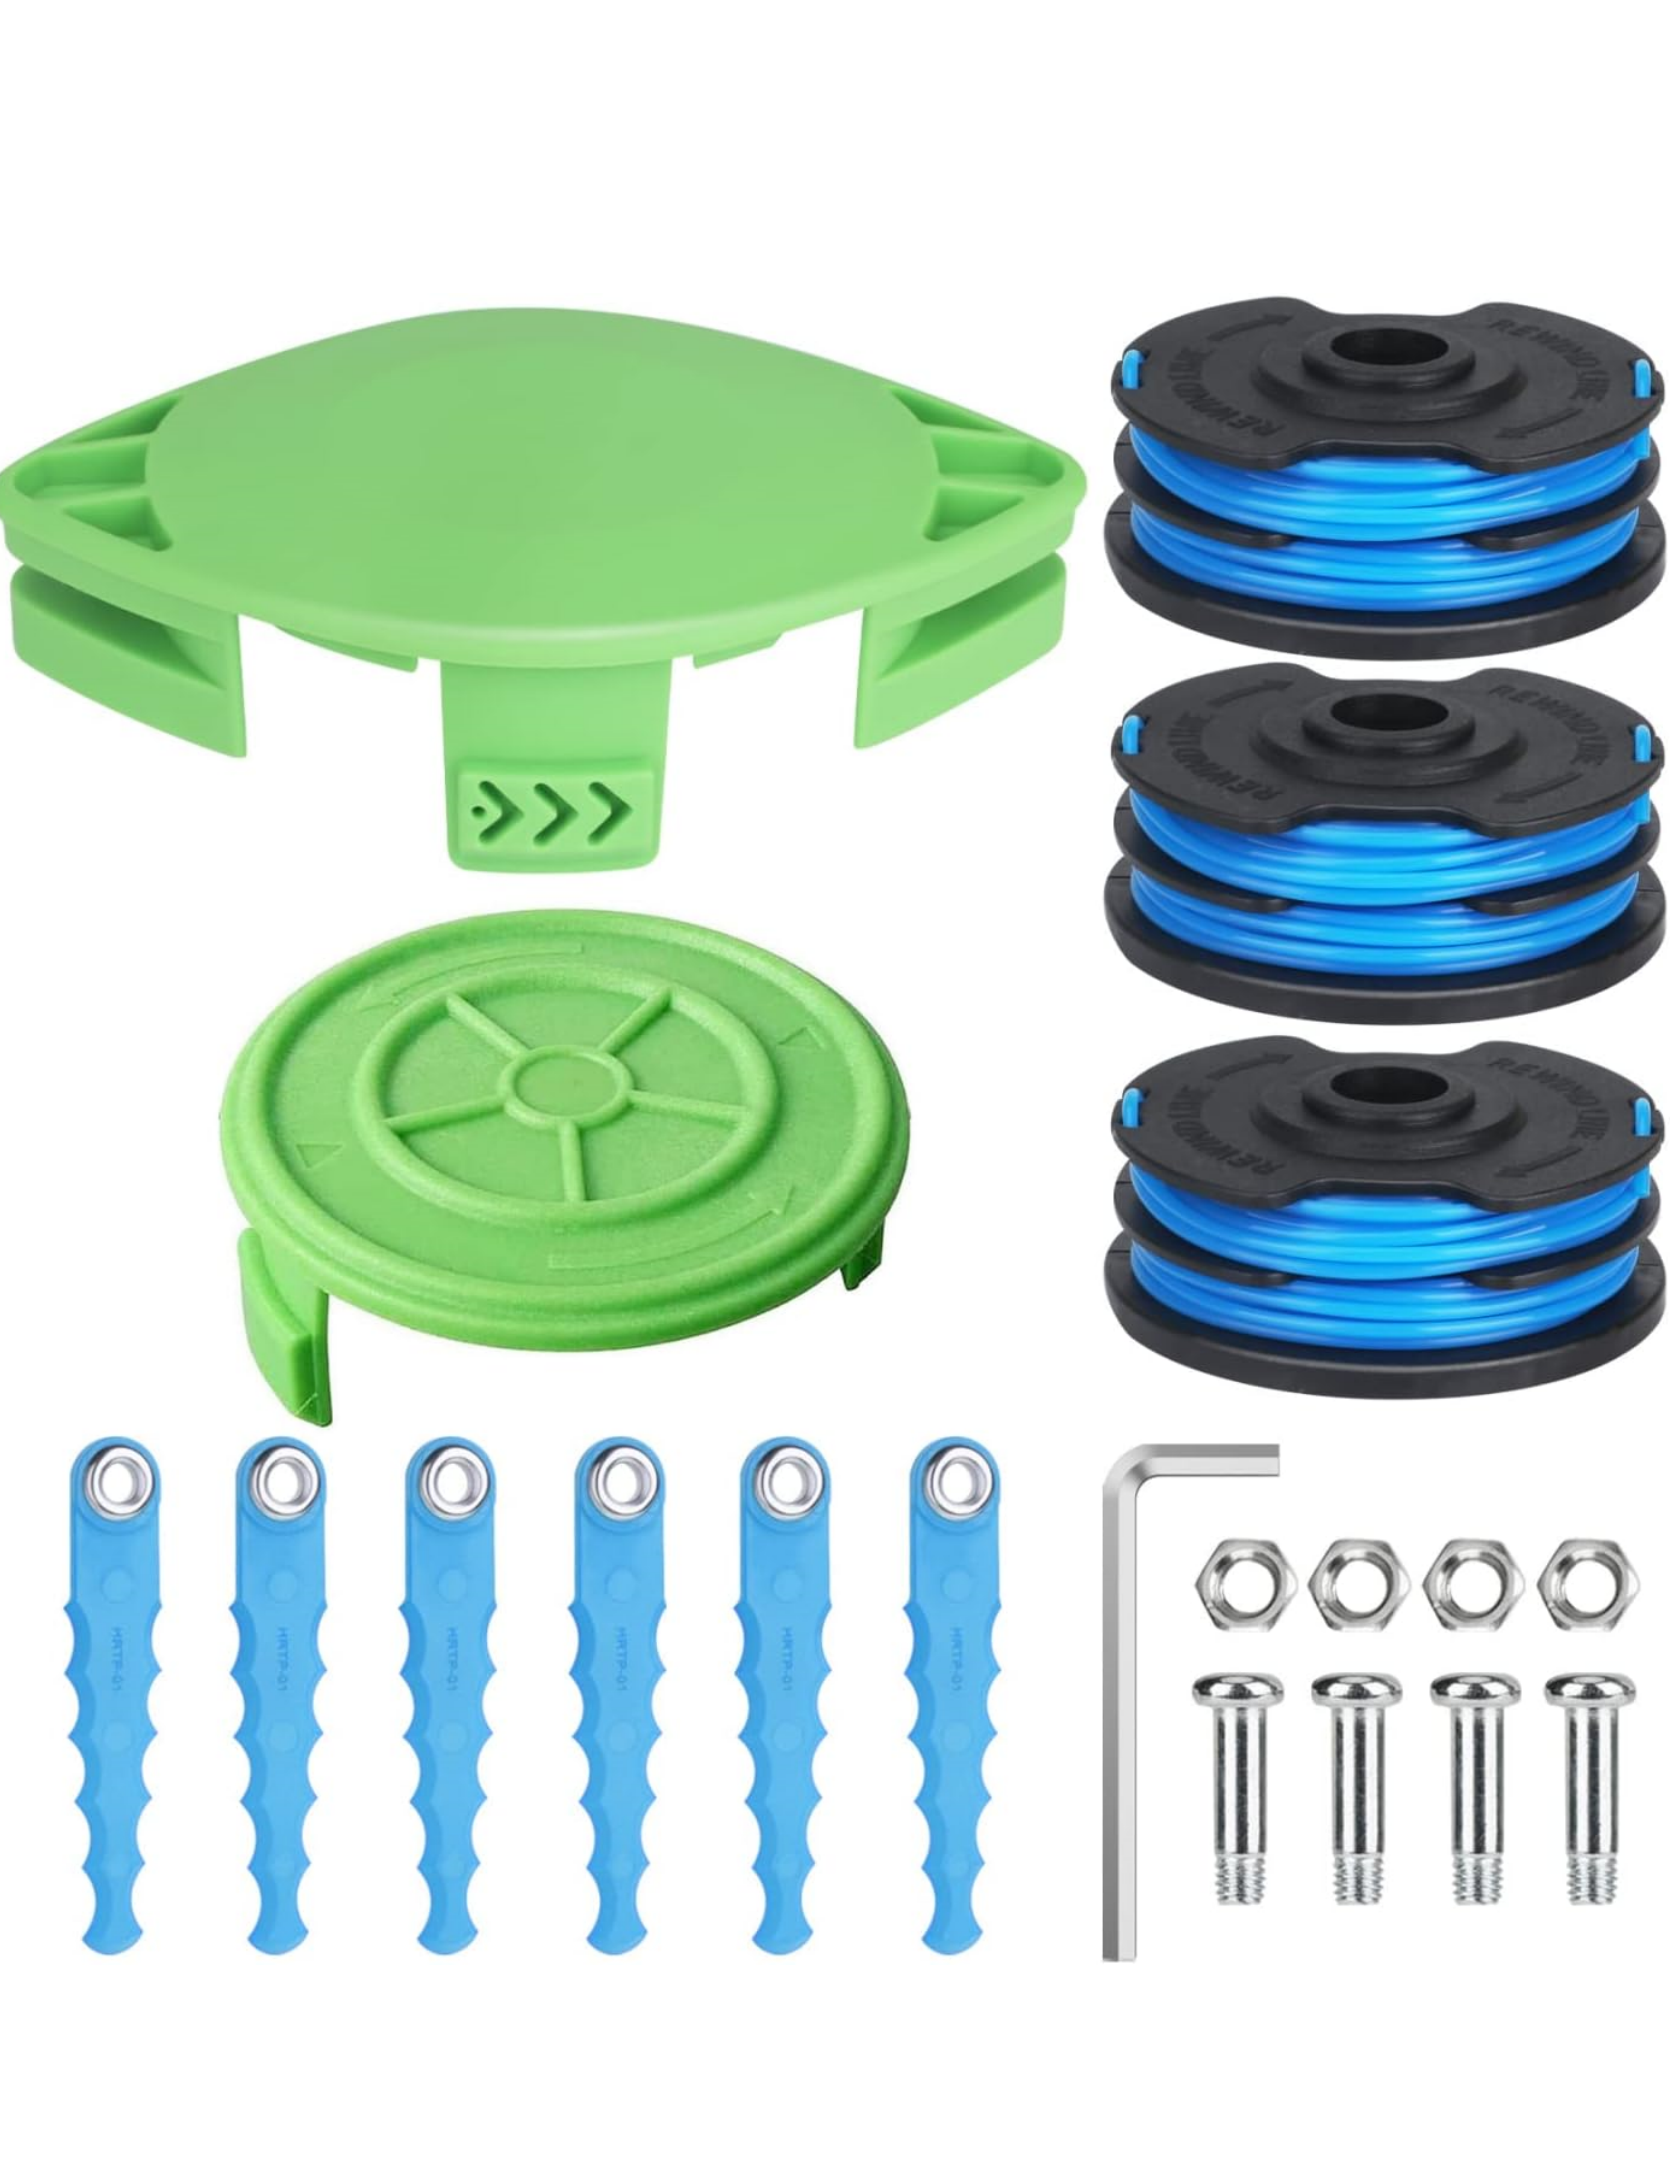 THTEN 2900719 Trimmer Blades Head Replacement Spool 20ft 0.065 inch Compatible with Greenworks 2101602 2101602A STBA40B210 2101602 ST40B410 BST4000 Dual line String Trimmer,20 Pack